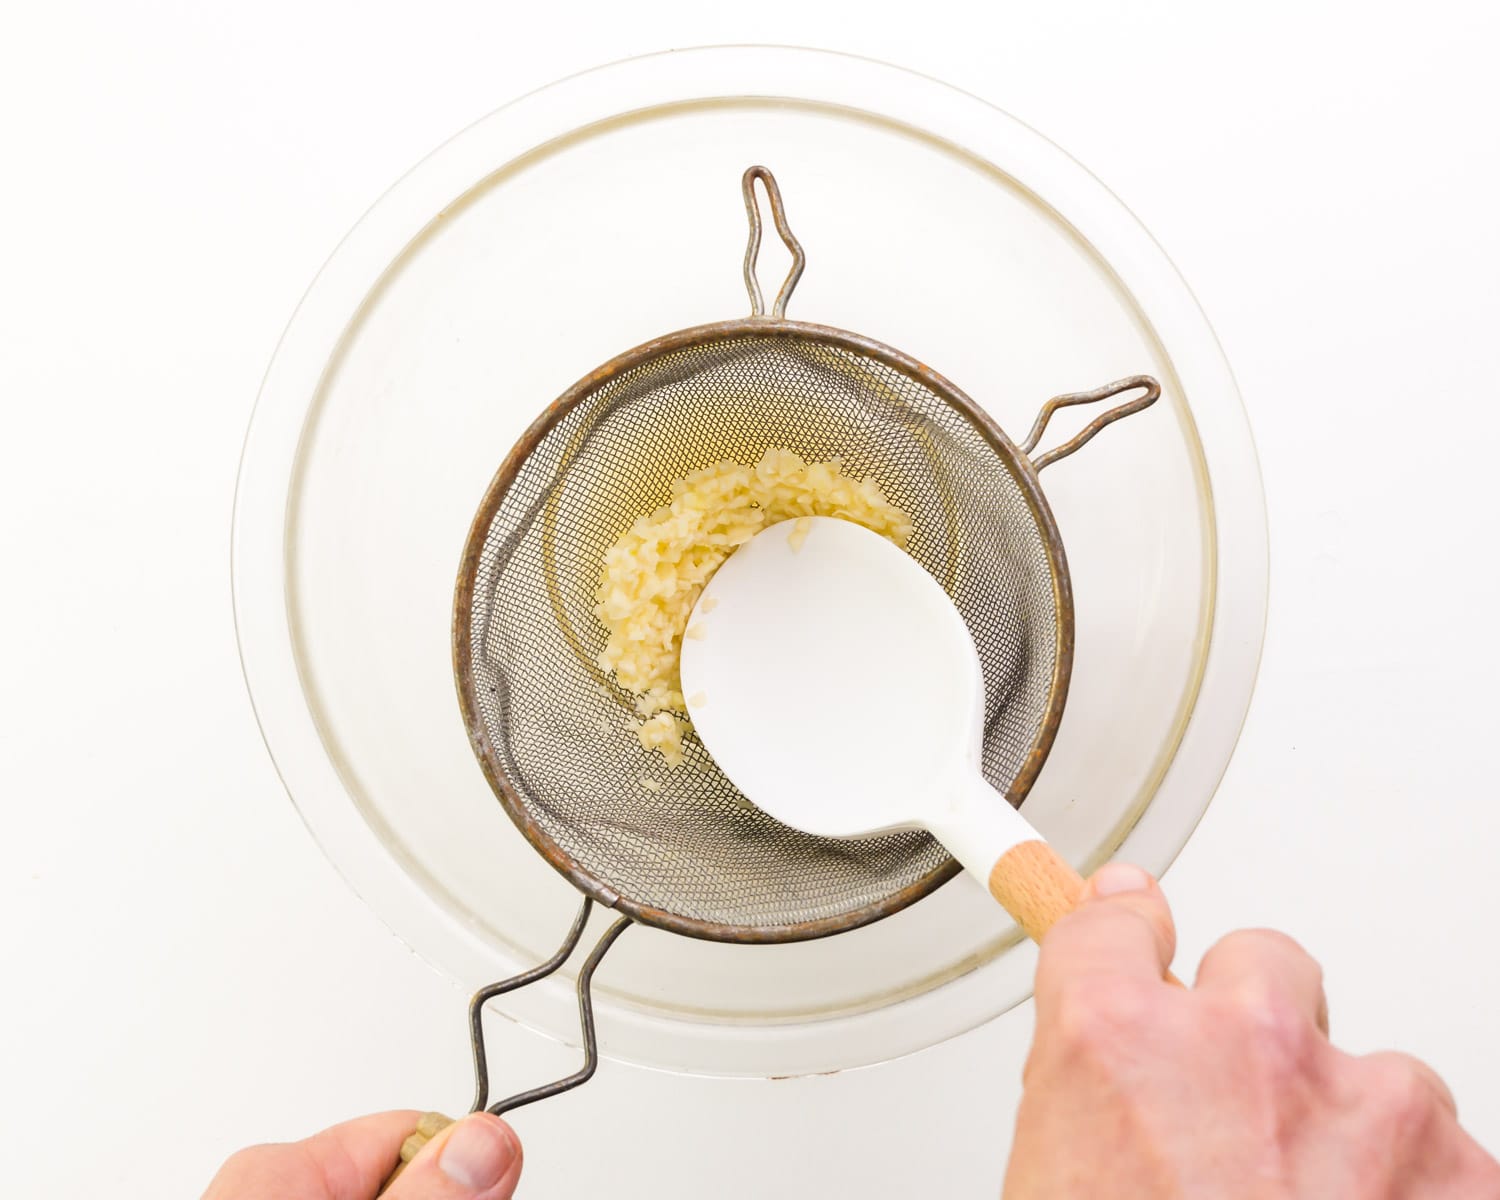 Garlic is being pressed with a spatula into a fine mesh strainer positioned over a glass bowl.